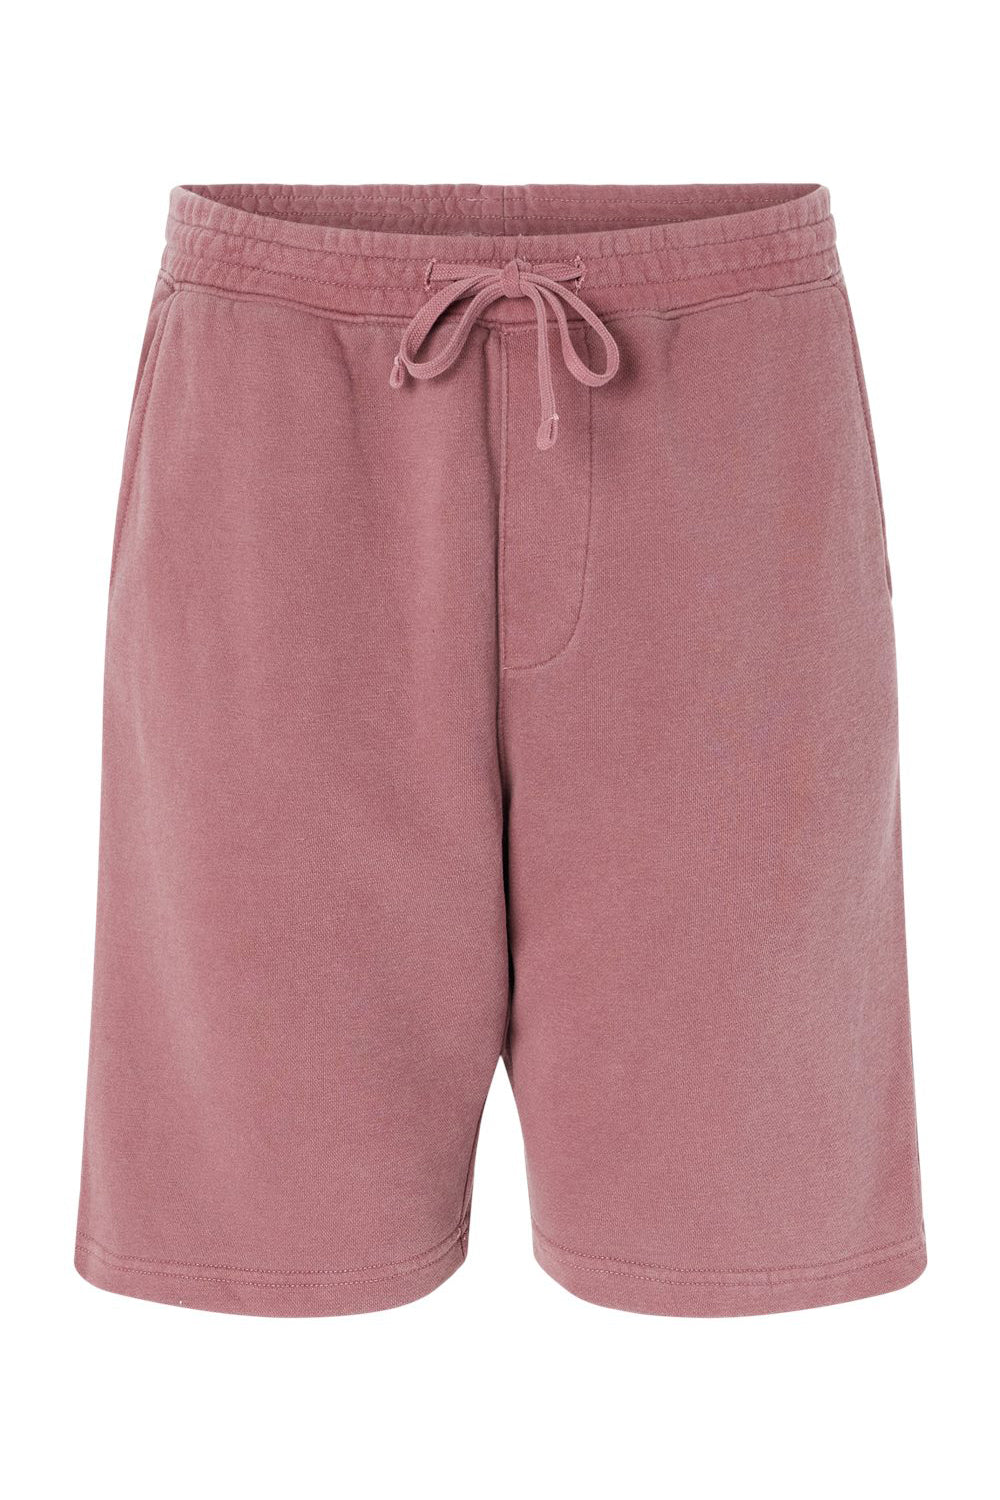 Independent Trading Co. PRM50STPD Mens Pigment Dyed Fleece Shorts w/ Pockets Maroon Flat Front